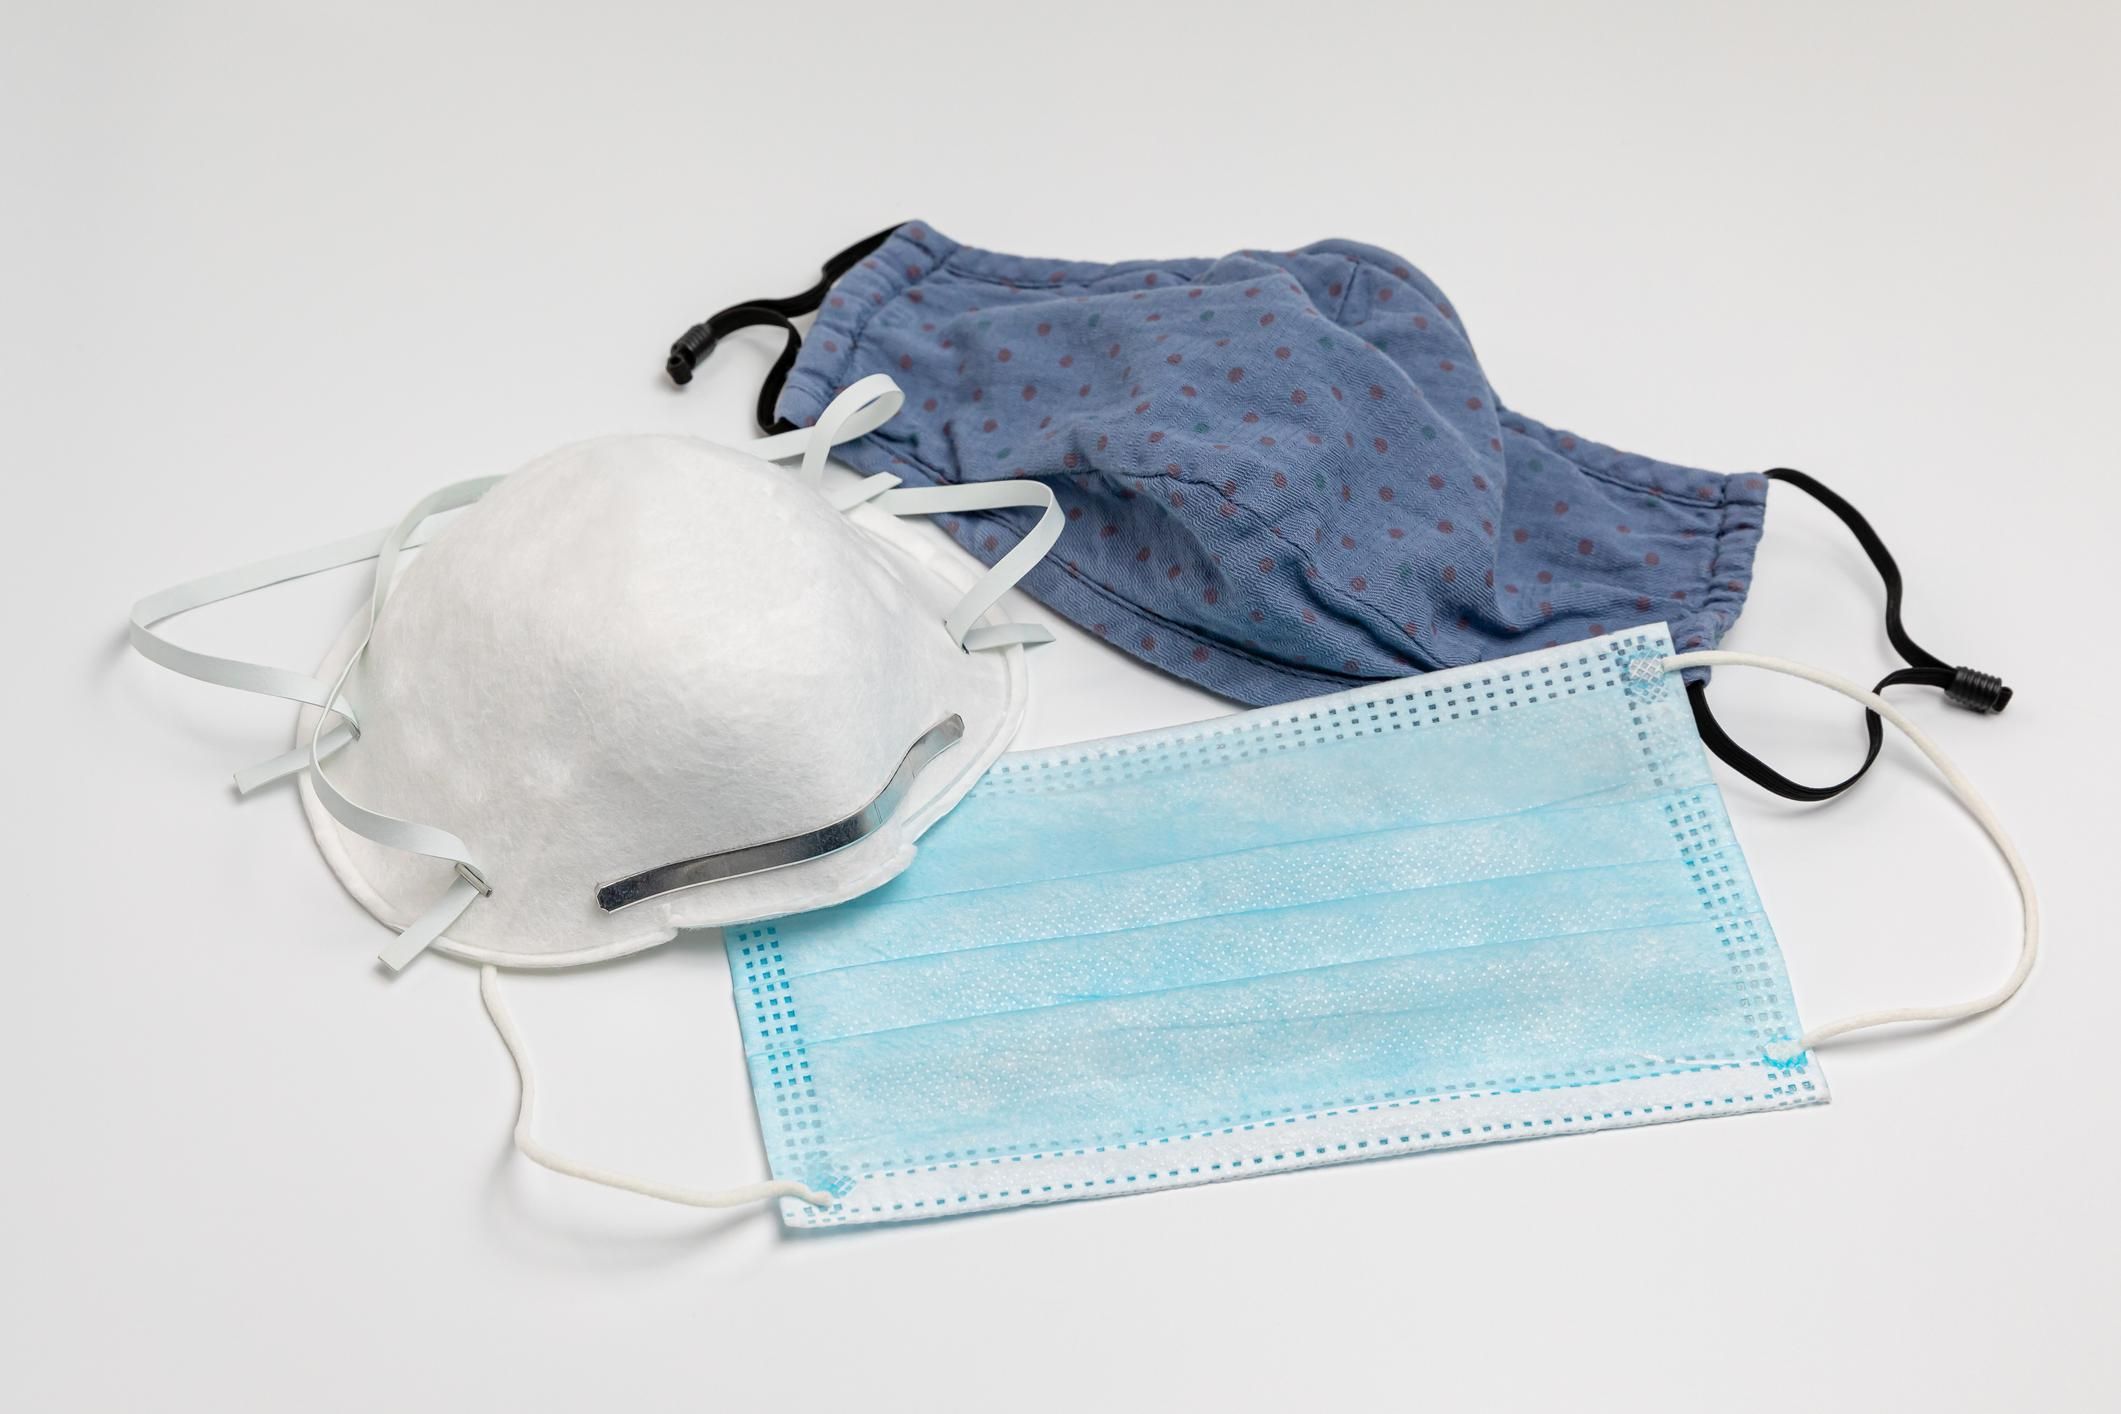 N95, surgical and cloth face masks